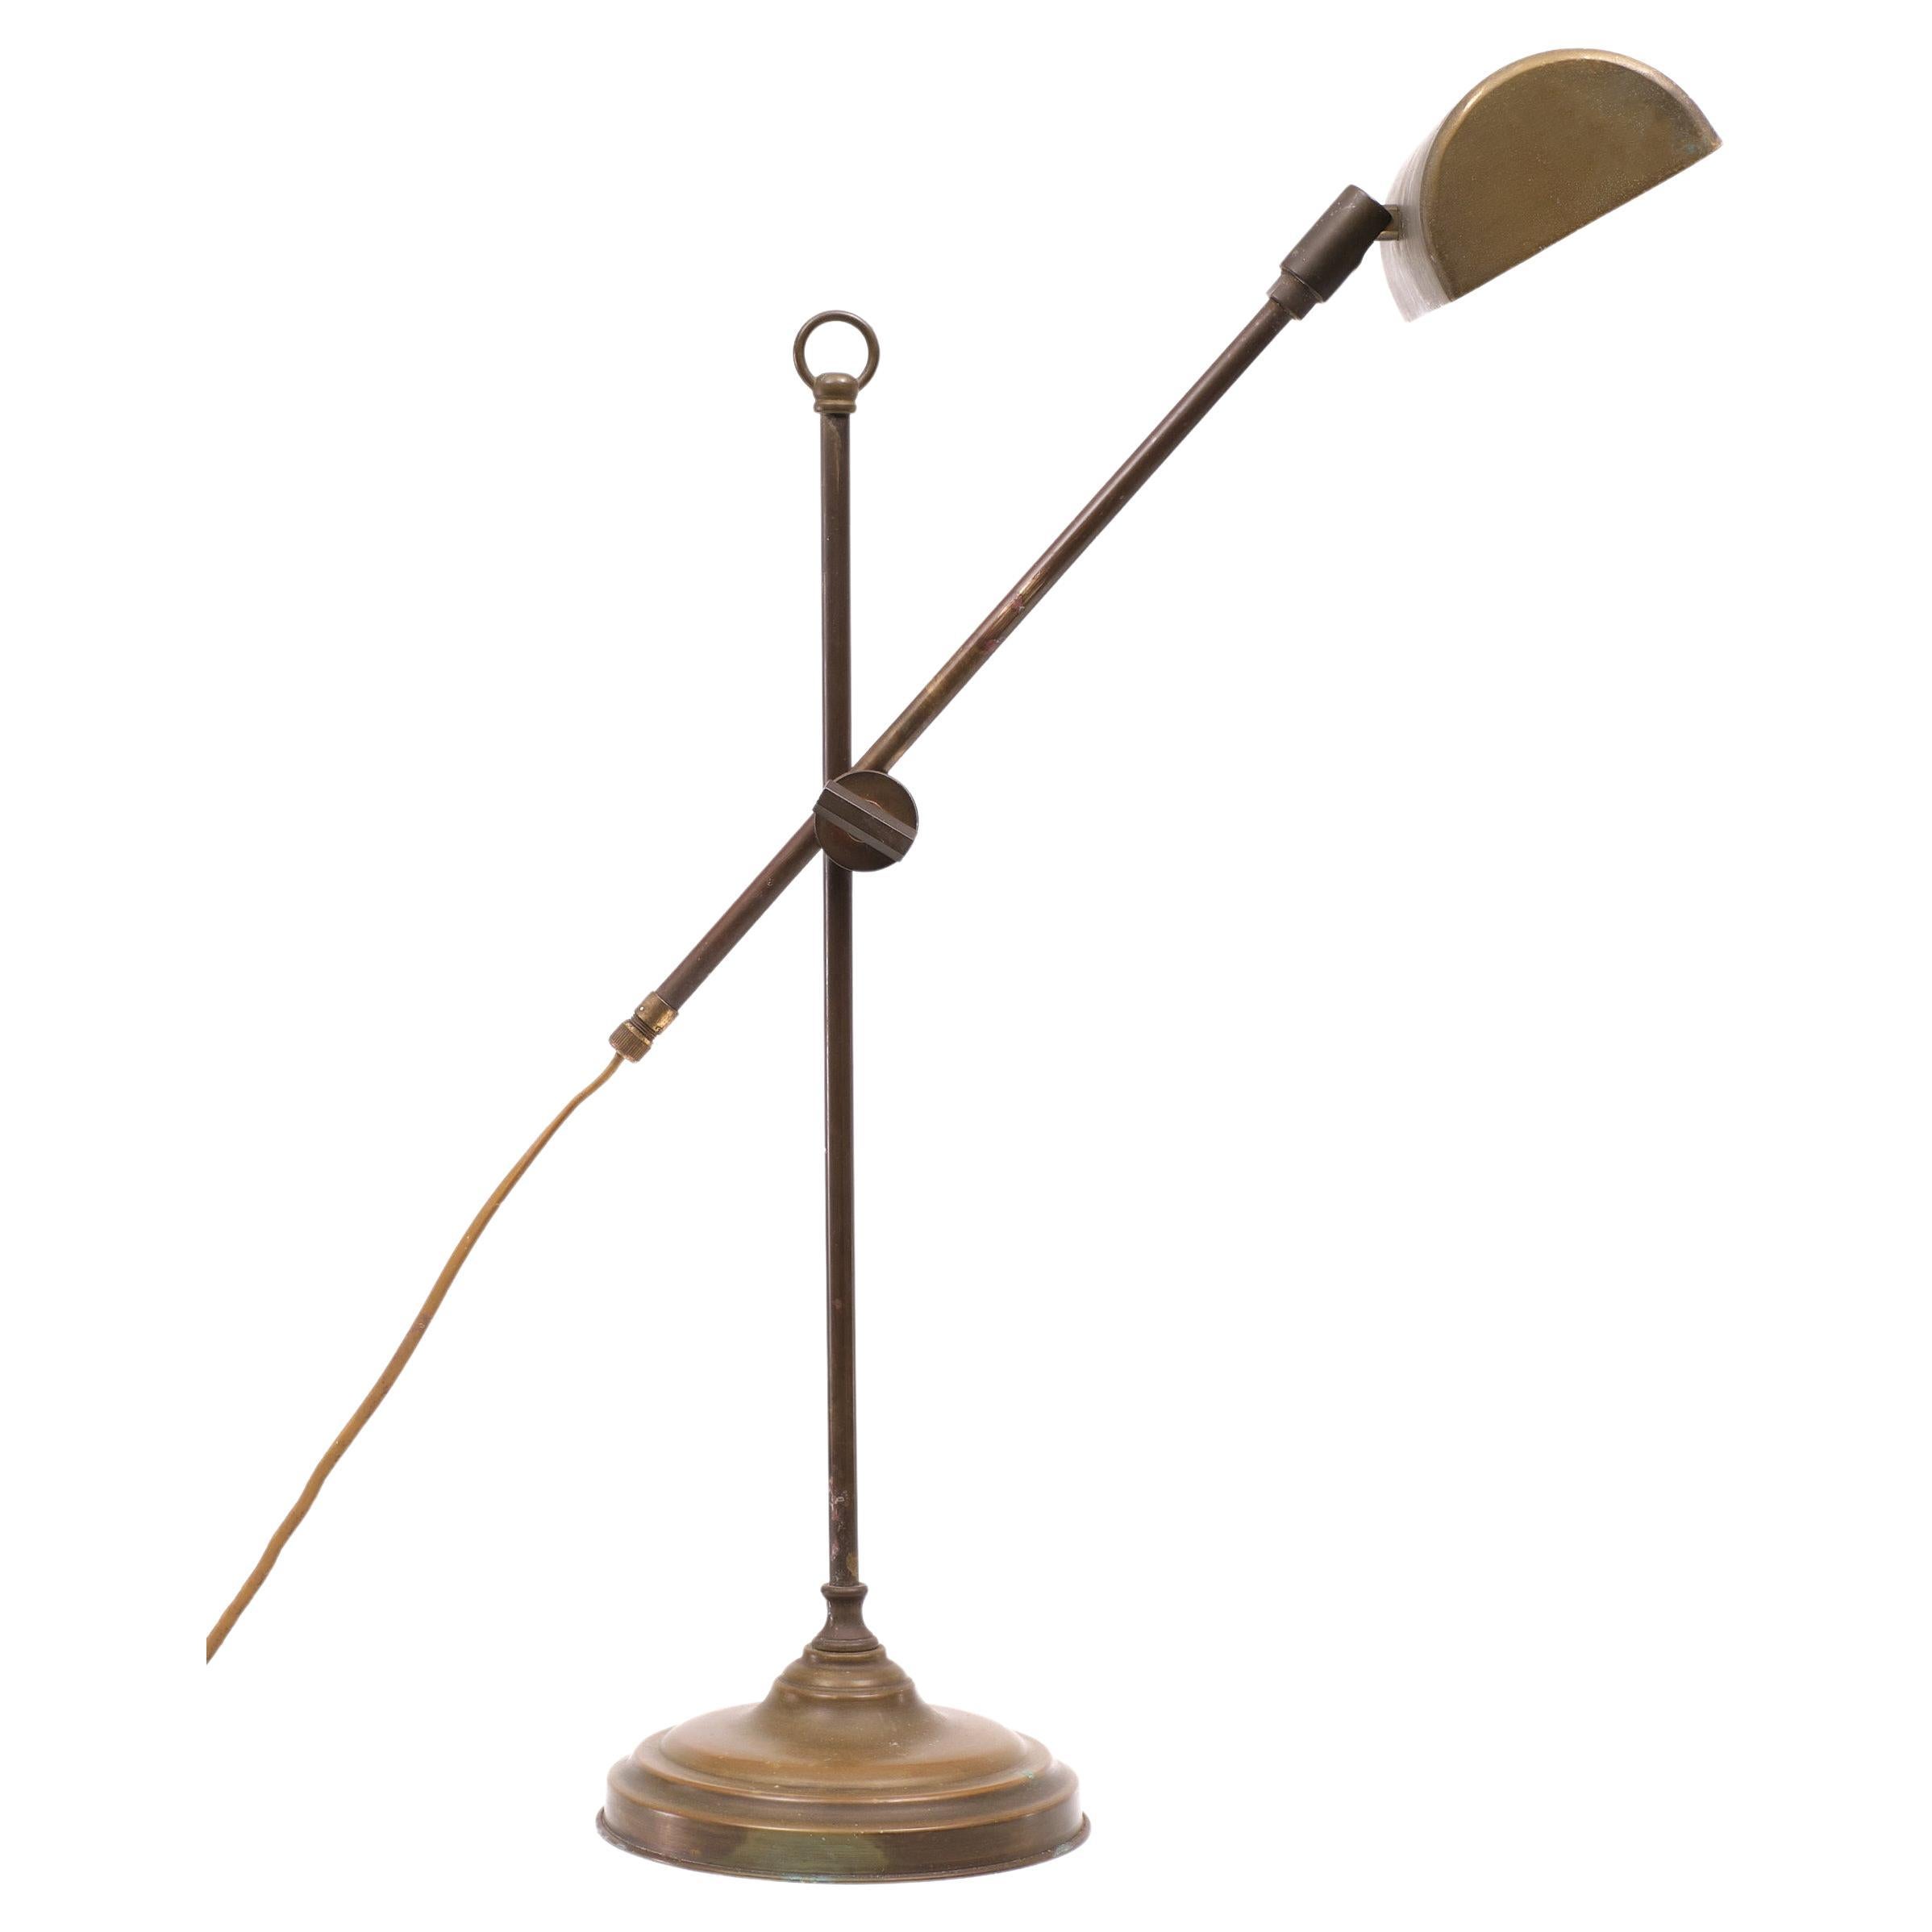 Exclusive bronze desk lamp. Made in Italy manufactured by Framon.
Signed inside the shade. Adjustable in height. Small socket bulb needed.